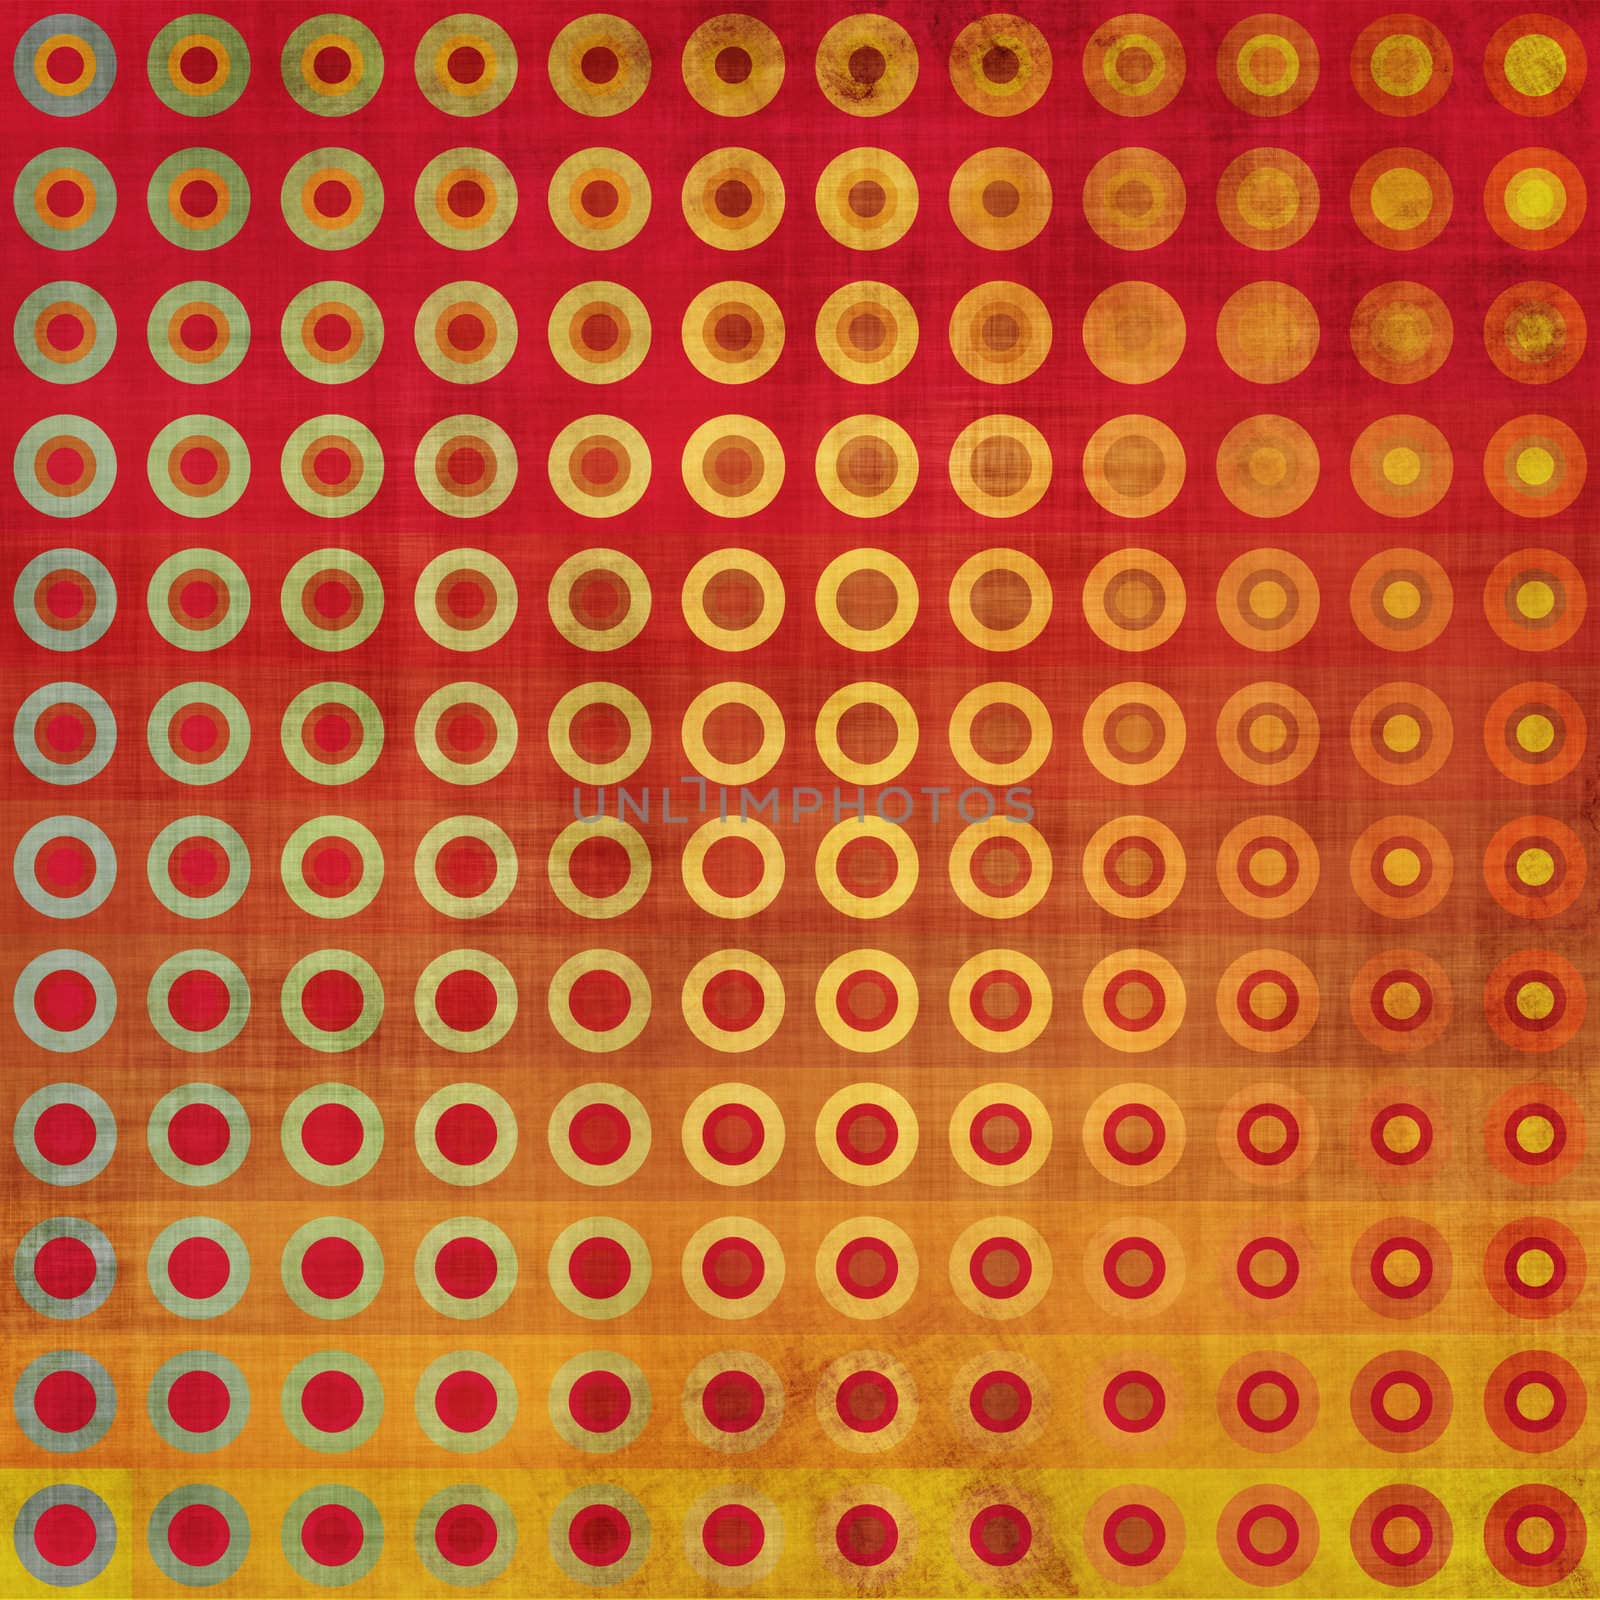 Square grungy background with lots of colorful circles.